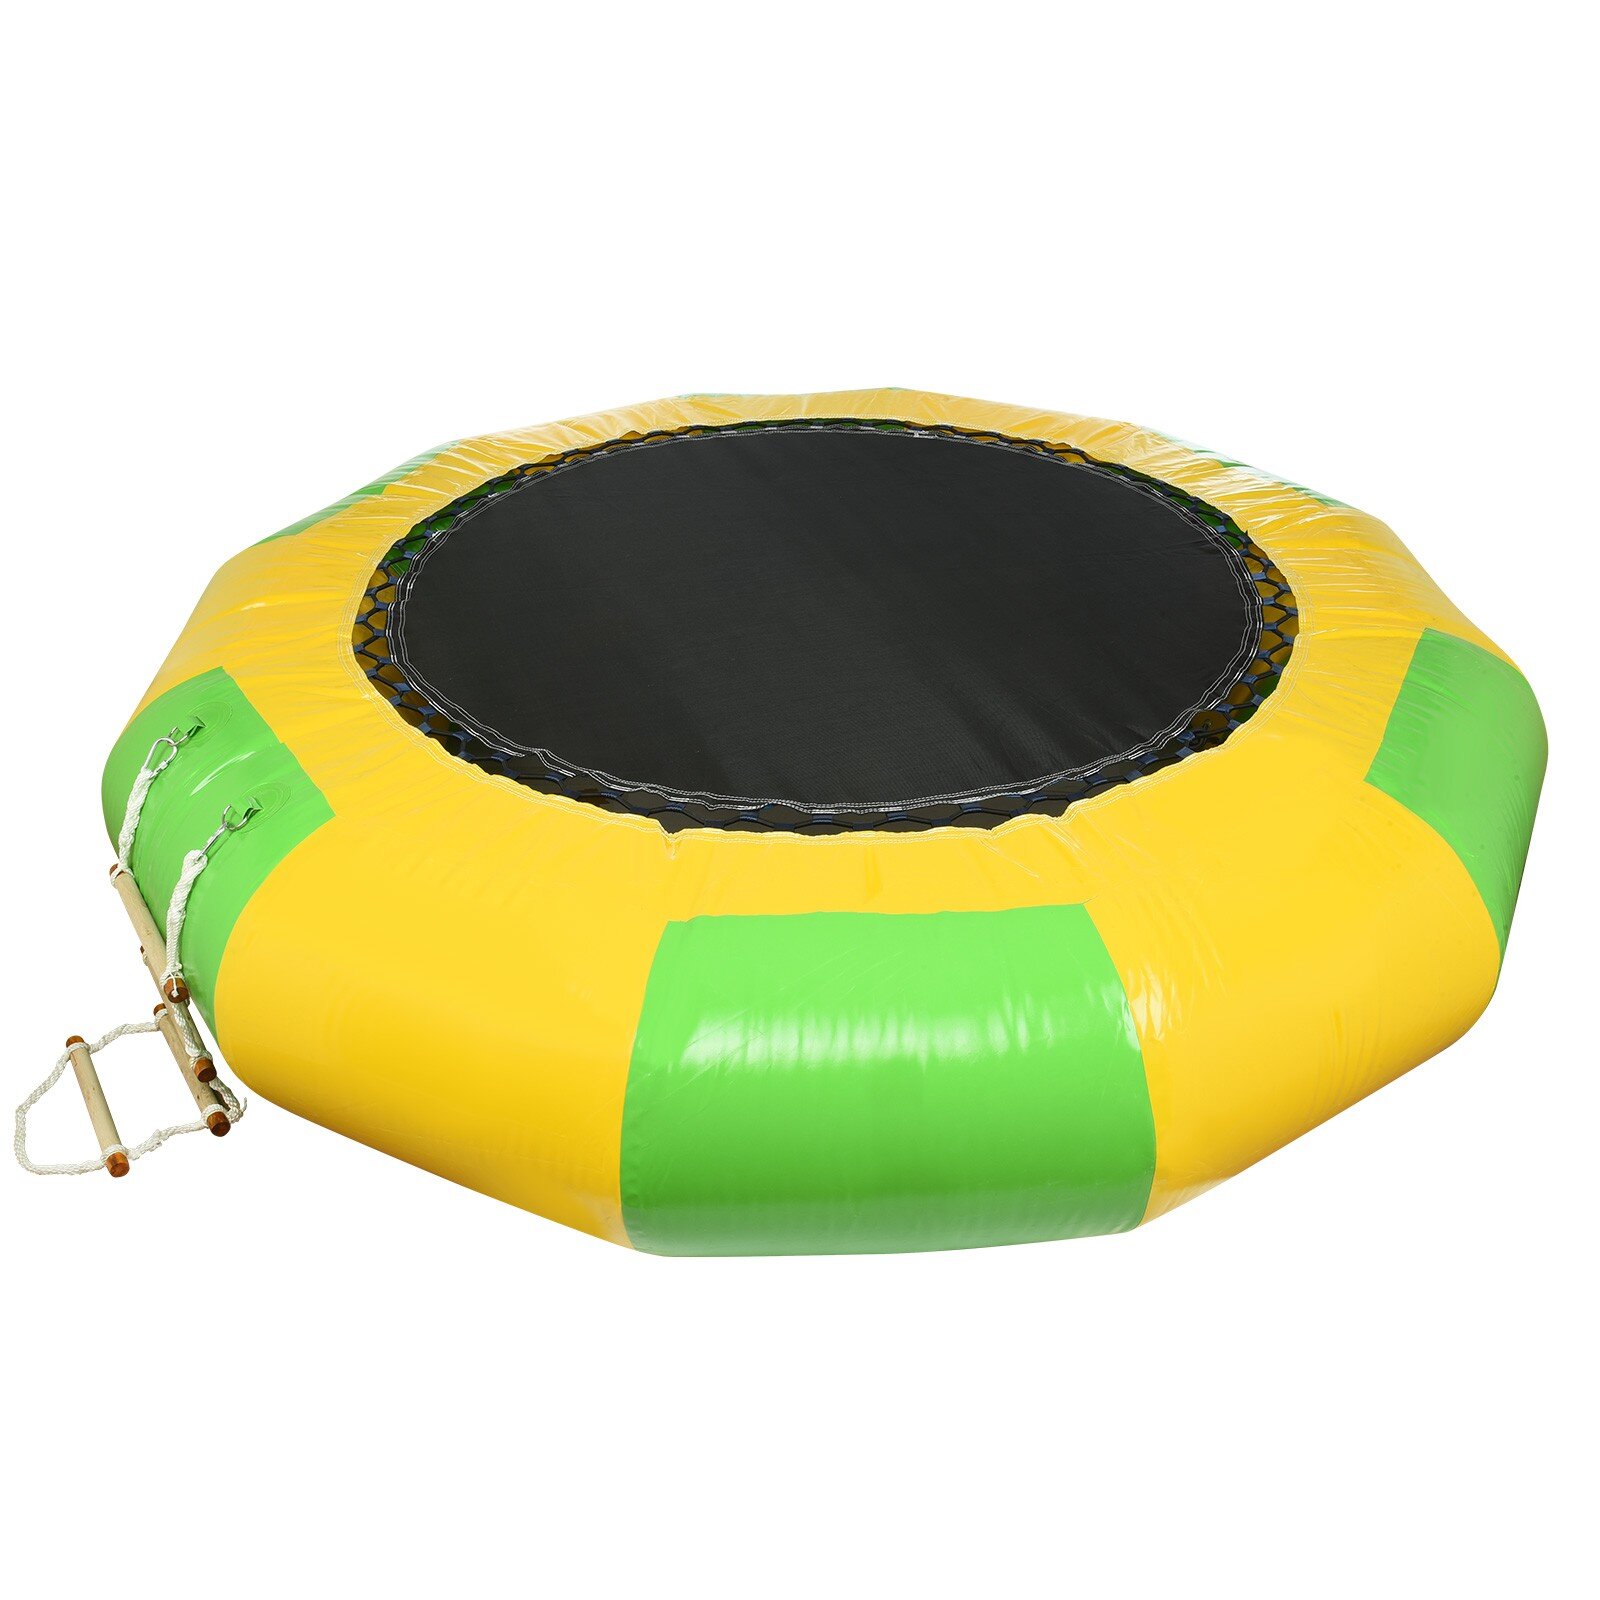 How to Inflate Water Trampoline 